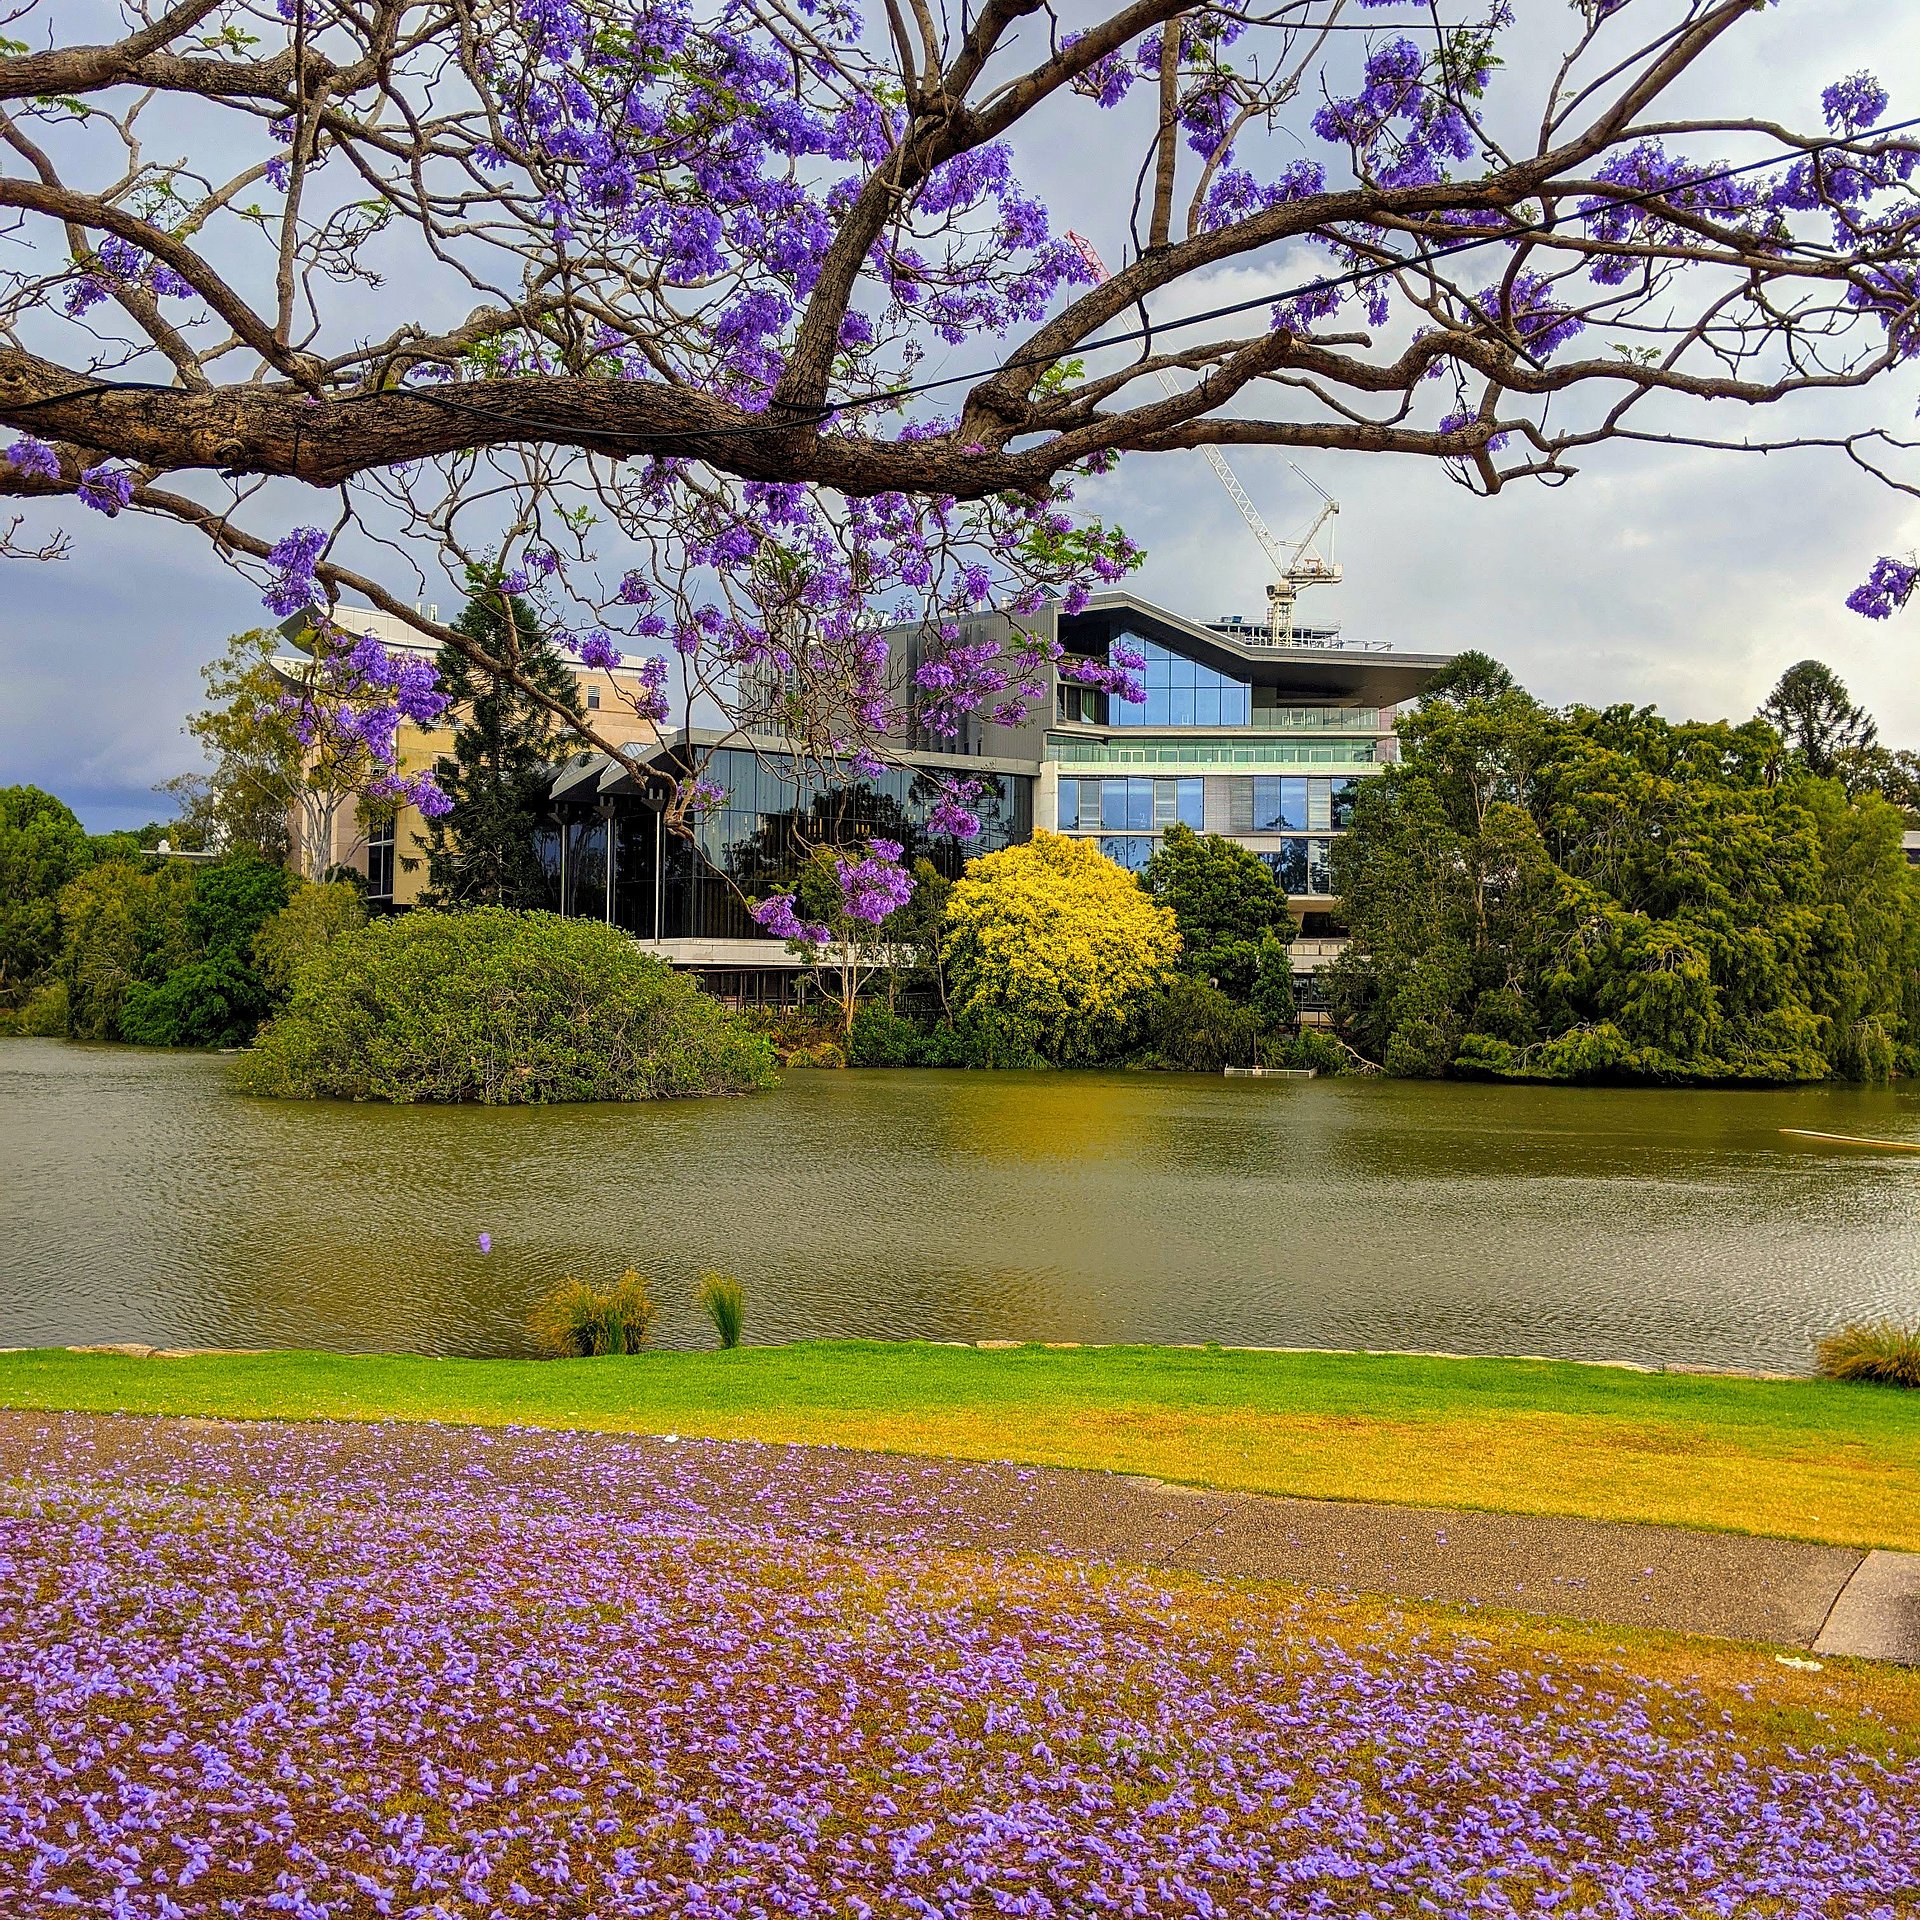 A University of Queensland building surrounded by purple flowering jacaranda trees.